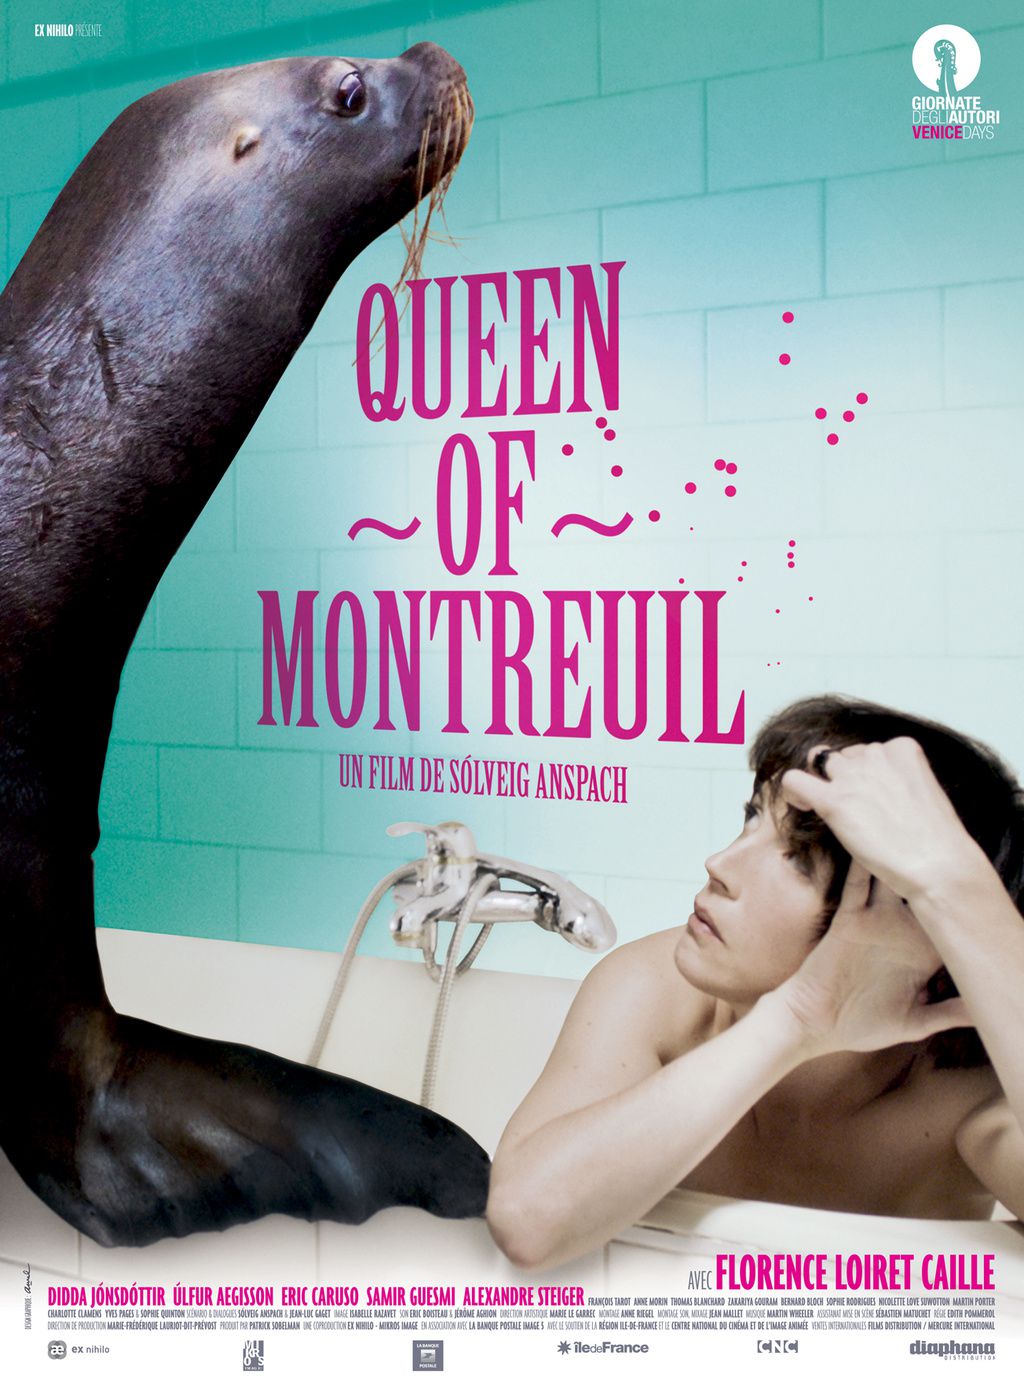 Queen of Montreuil - Film (2013) streaming VF gratuit complet